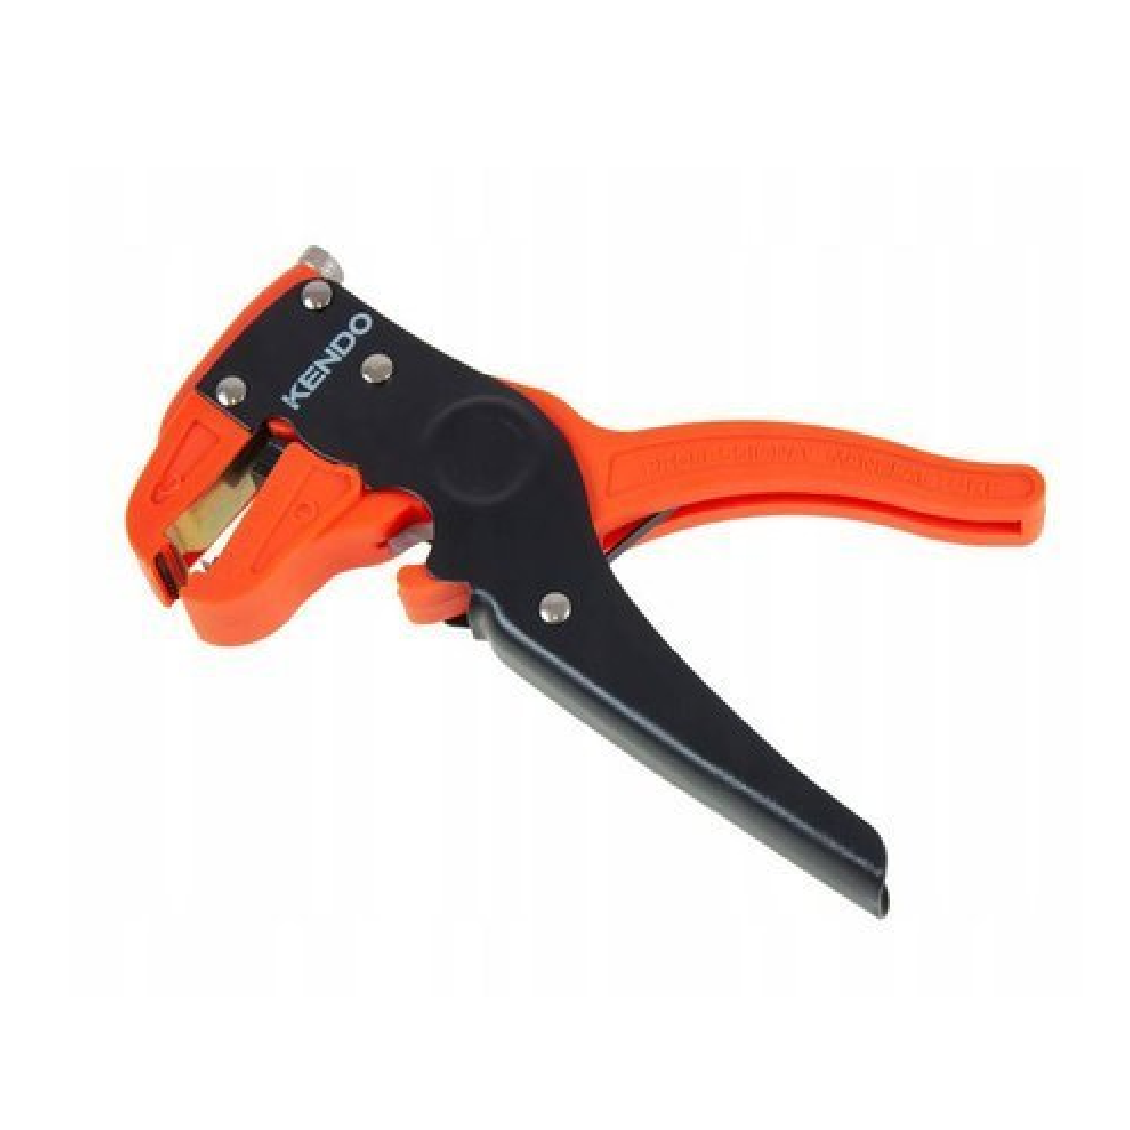 Kendo Electrical Cable Stripper 170MM